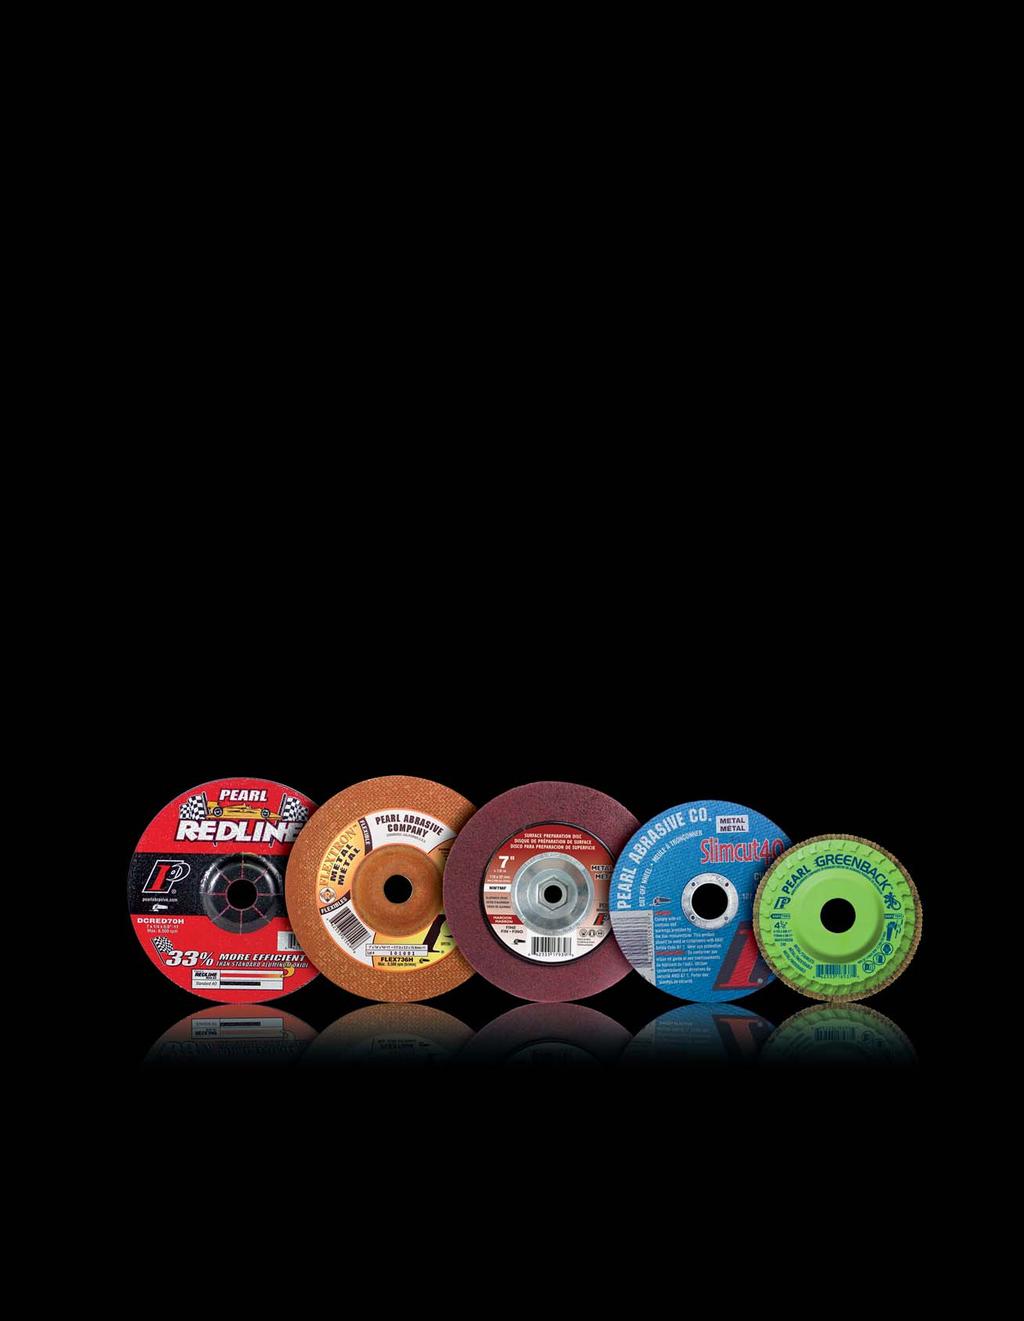 SPECIALTY ABRASIVE PRODUCTS THAT TARGET SPECIFIC NEEDS AND APPLICATIONS. PEARL ABRASIVE CO. IS DEDICATED TO DEVELOPING A SPECIAL LINE OF VISIONARY PRODUCTS AND TARGETED SOLUTIONS.